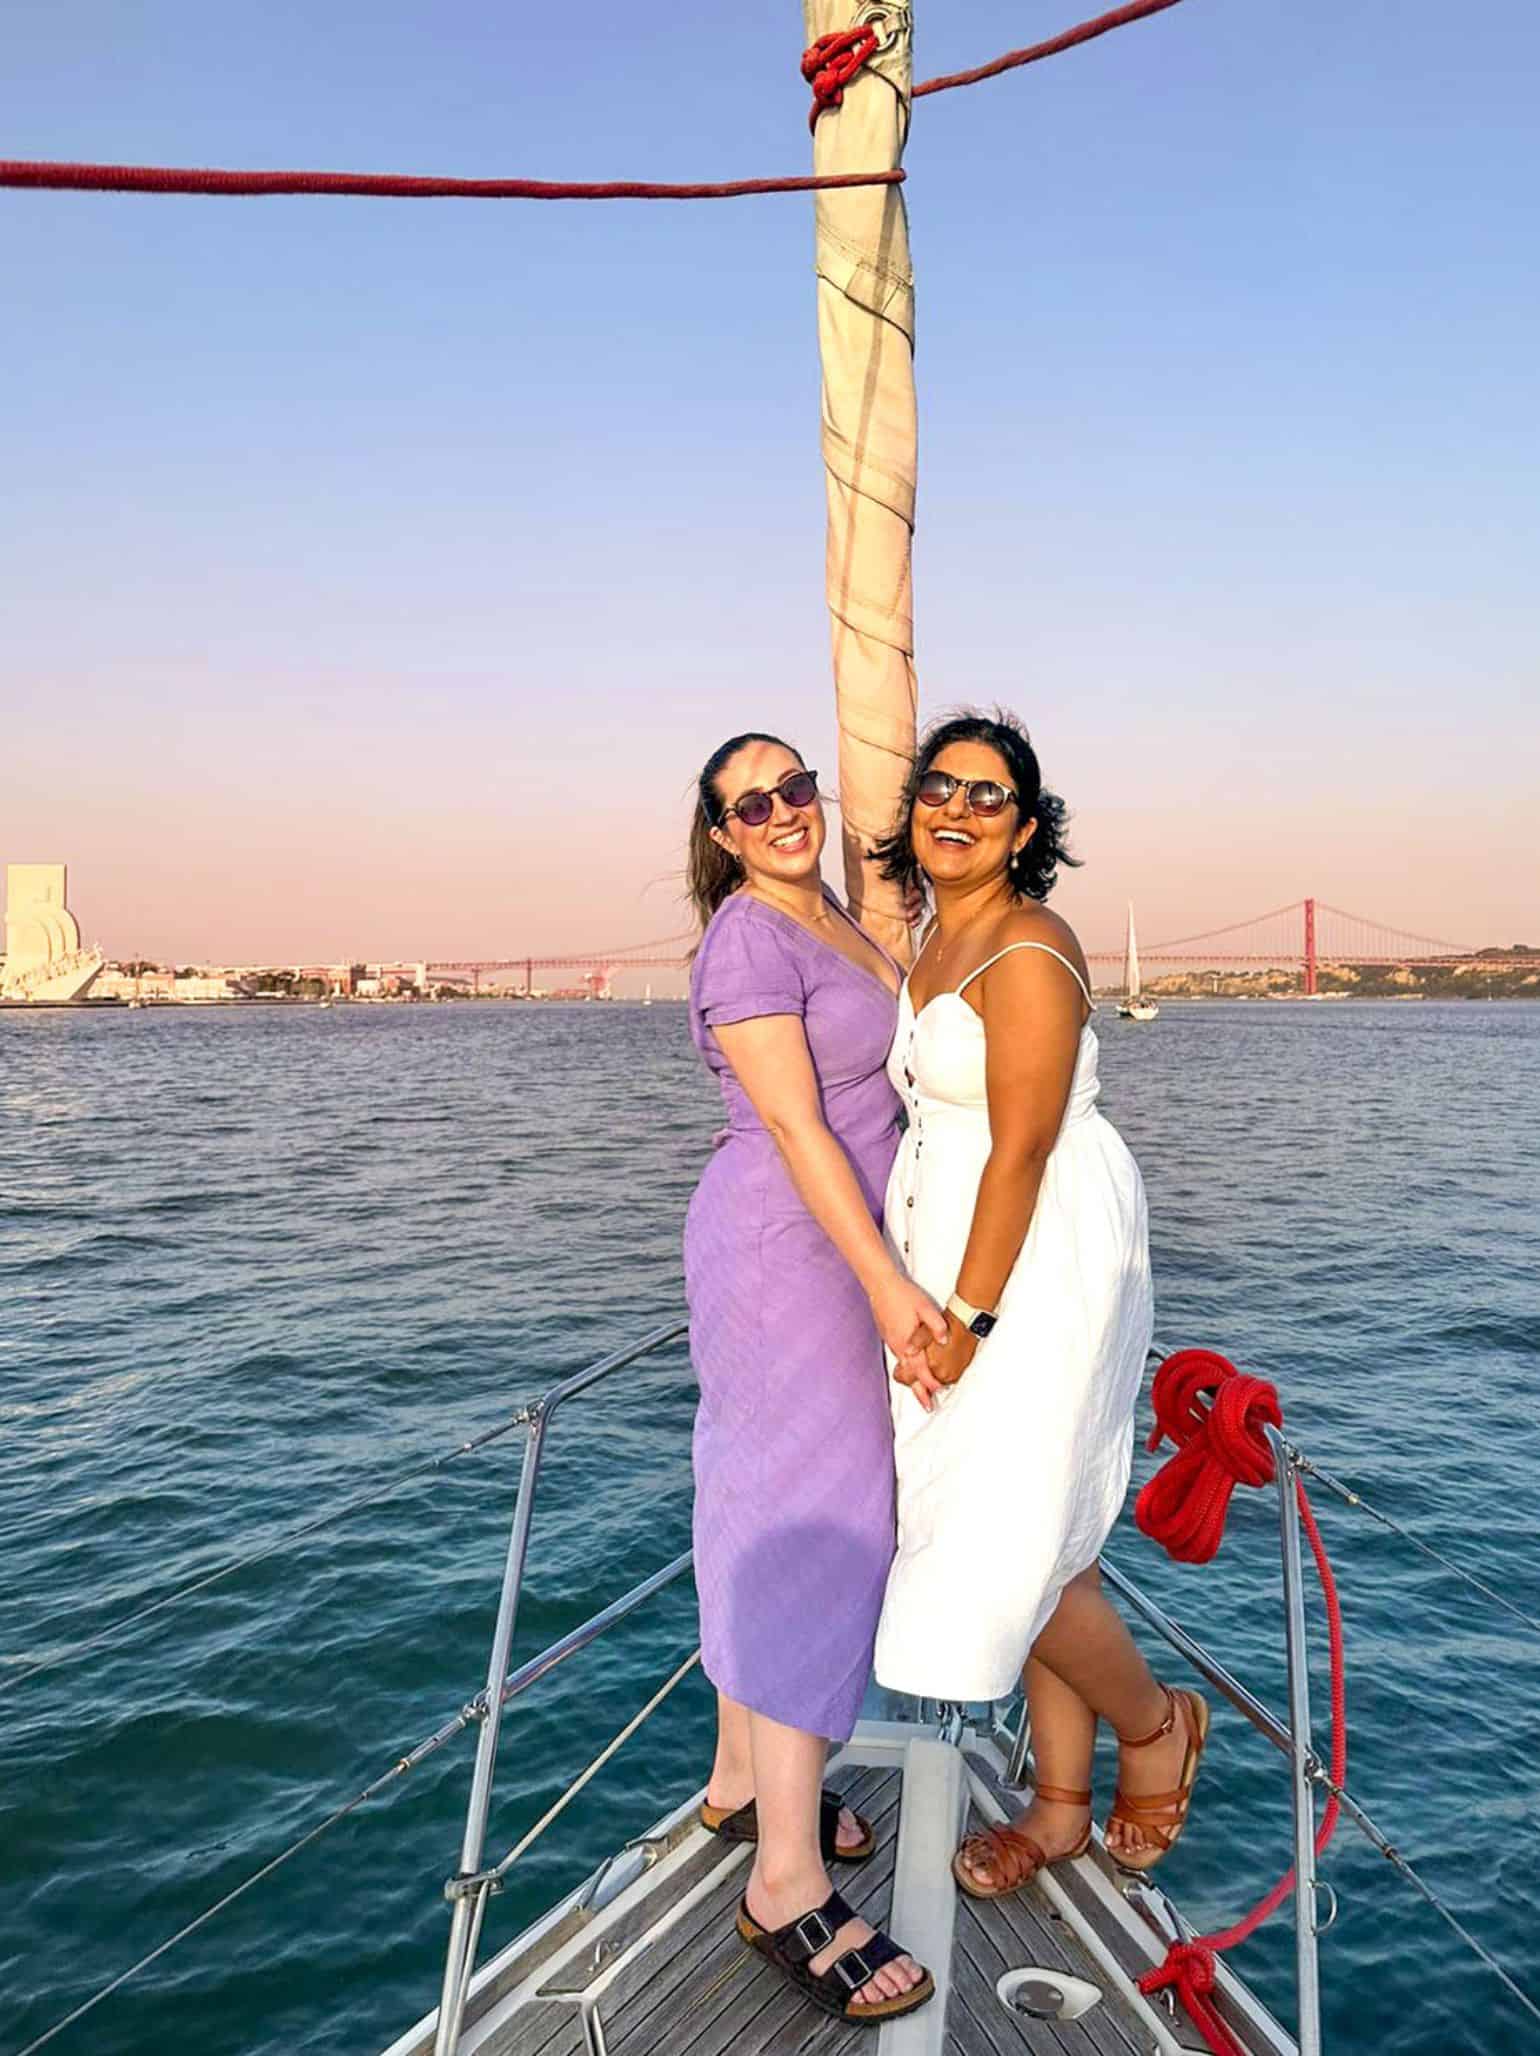 My friends enjoying a sunset sailboat tour on the River Tagus. 